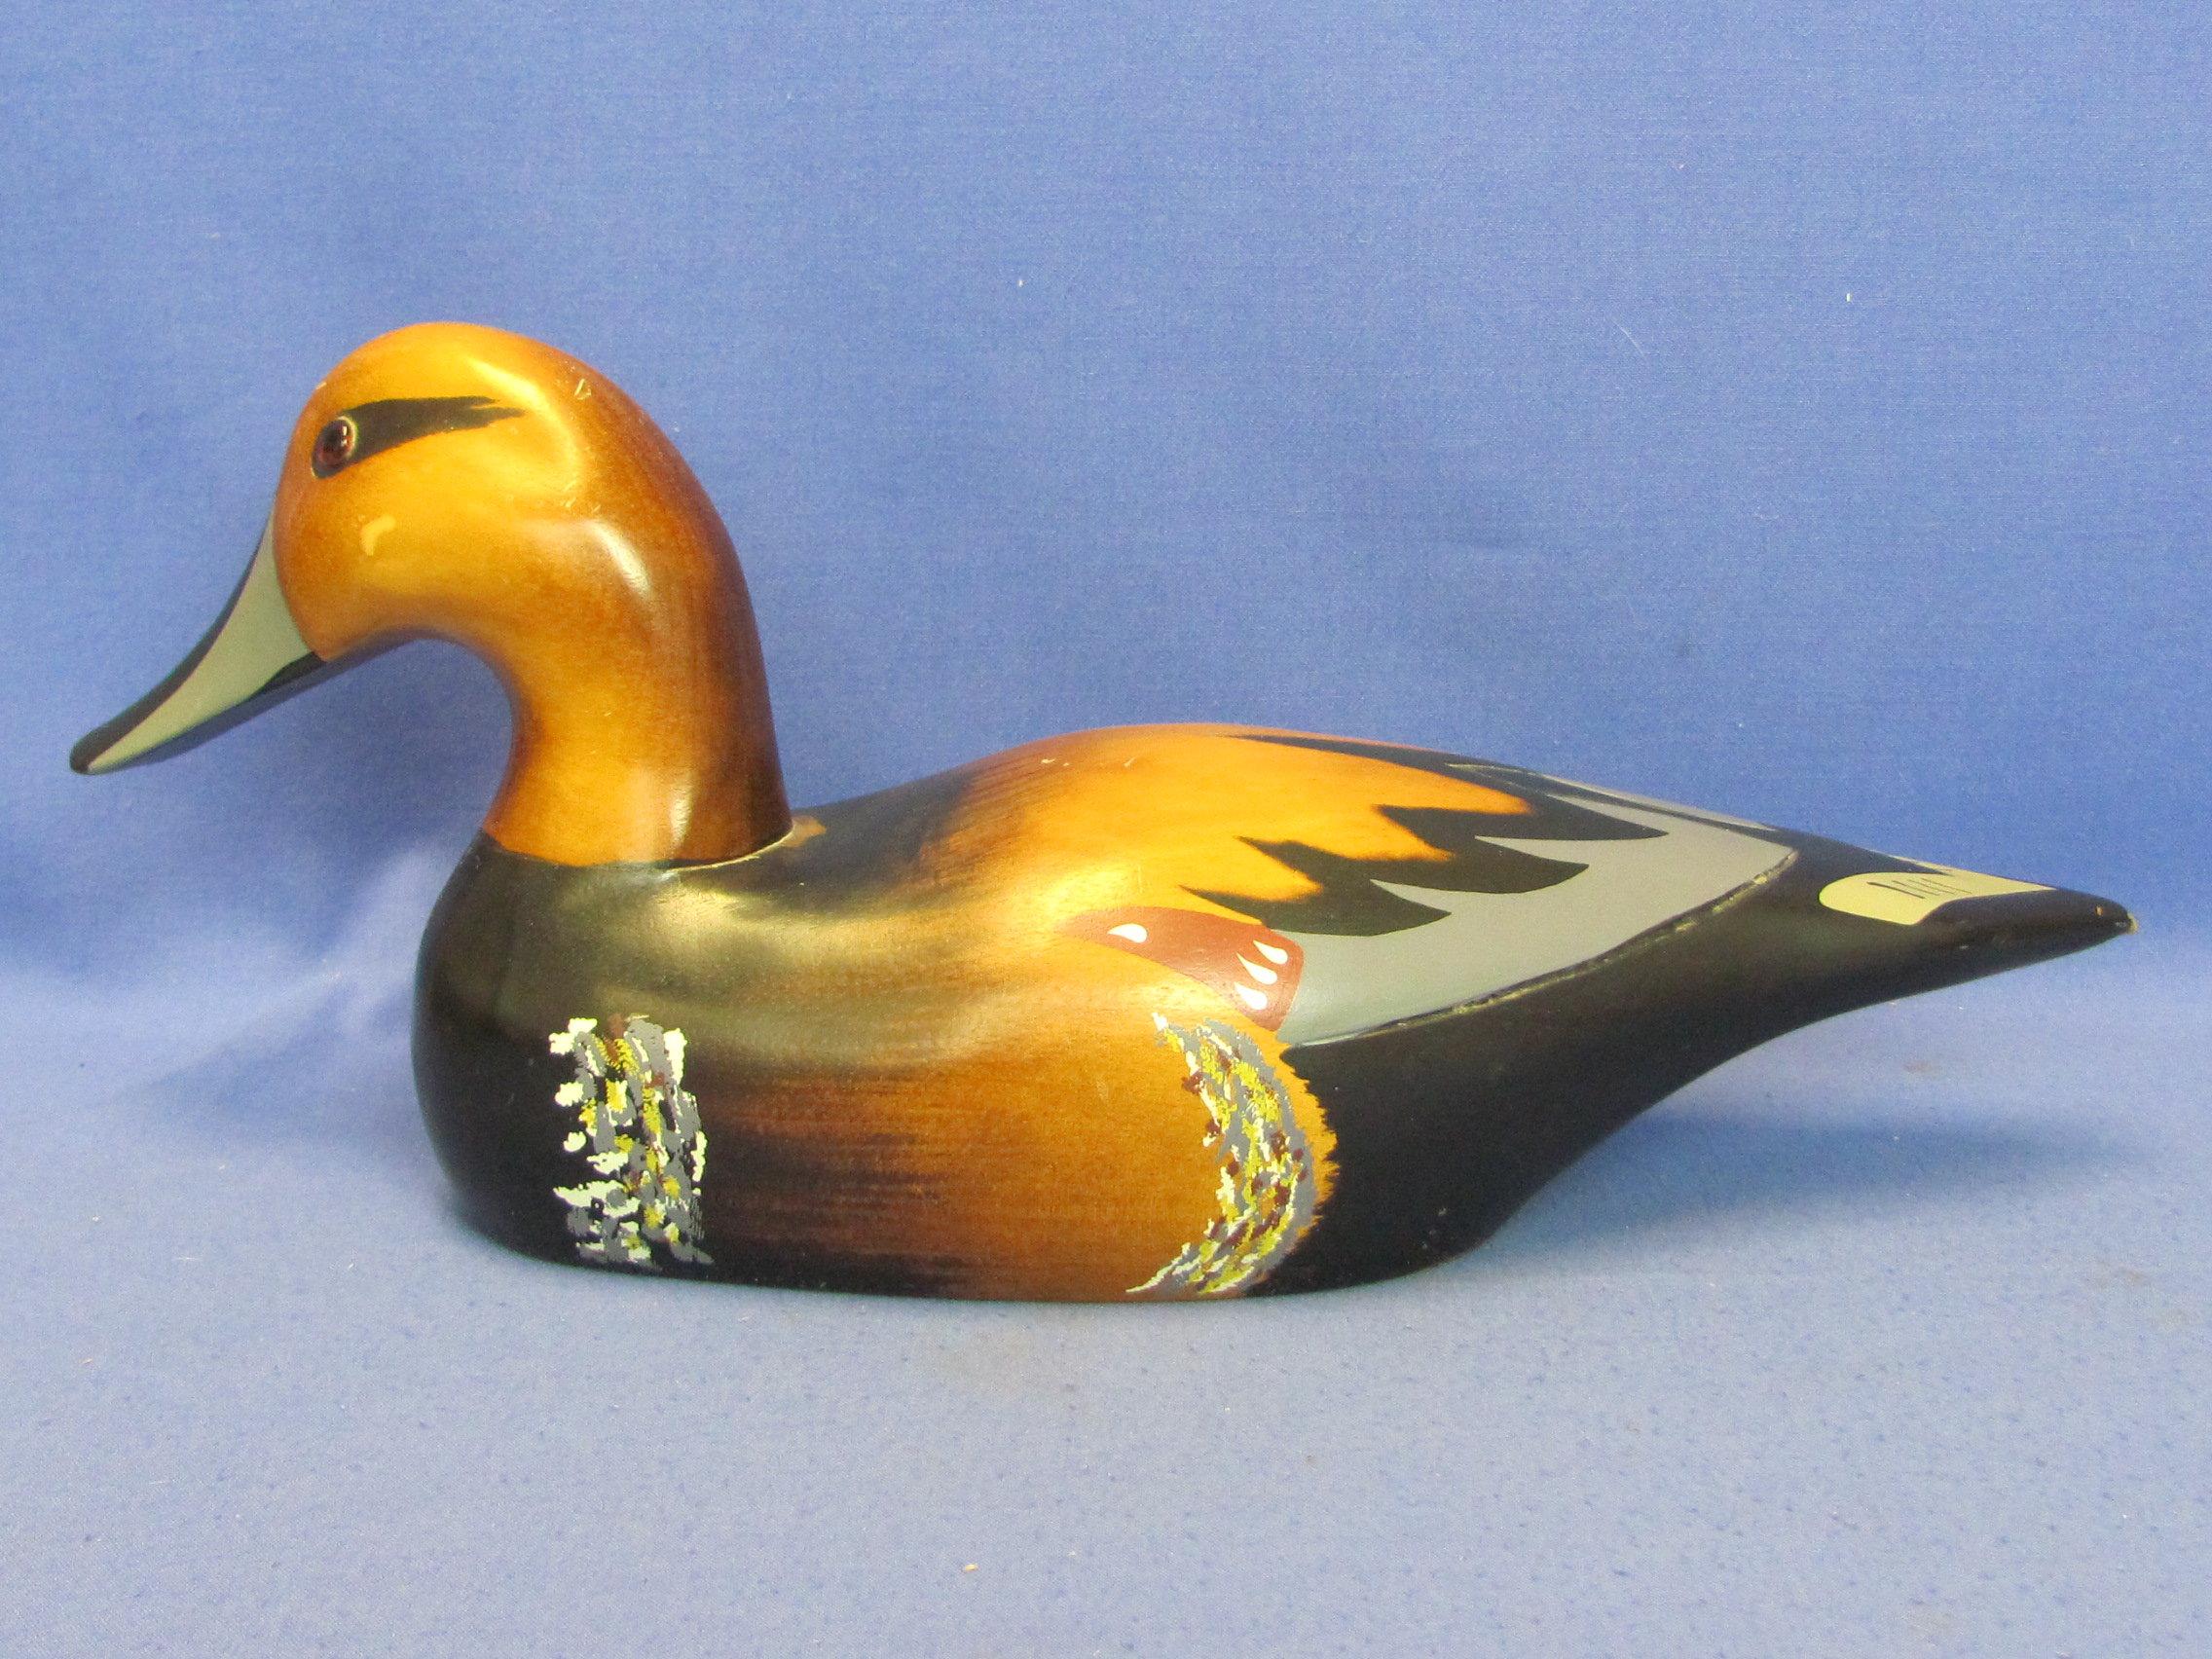 Painted Wood duck Decoy/Figurine – 15” long – No name or maker